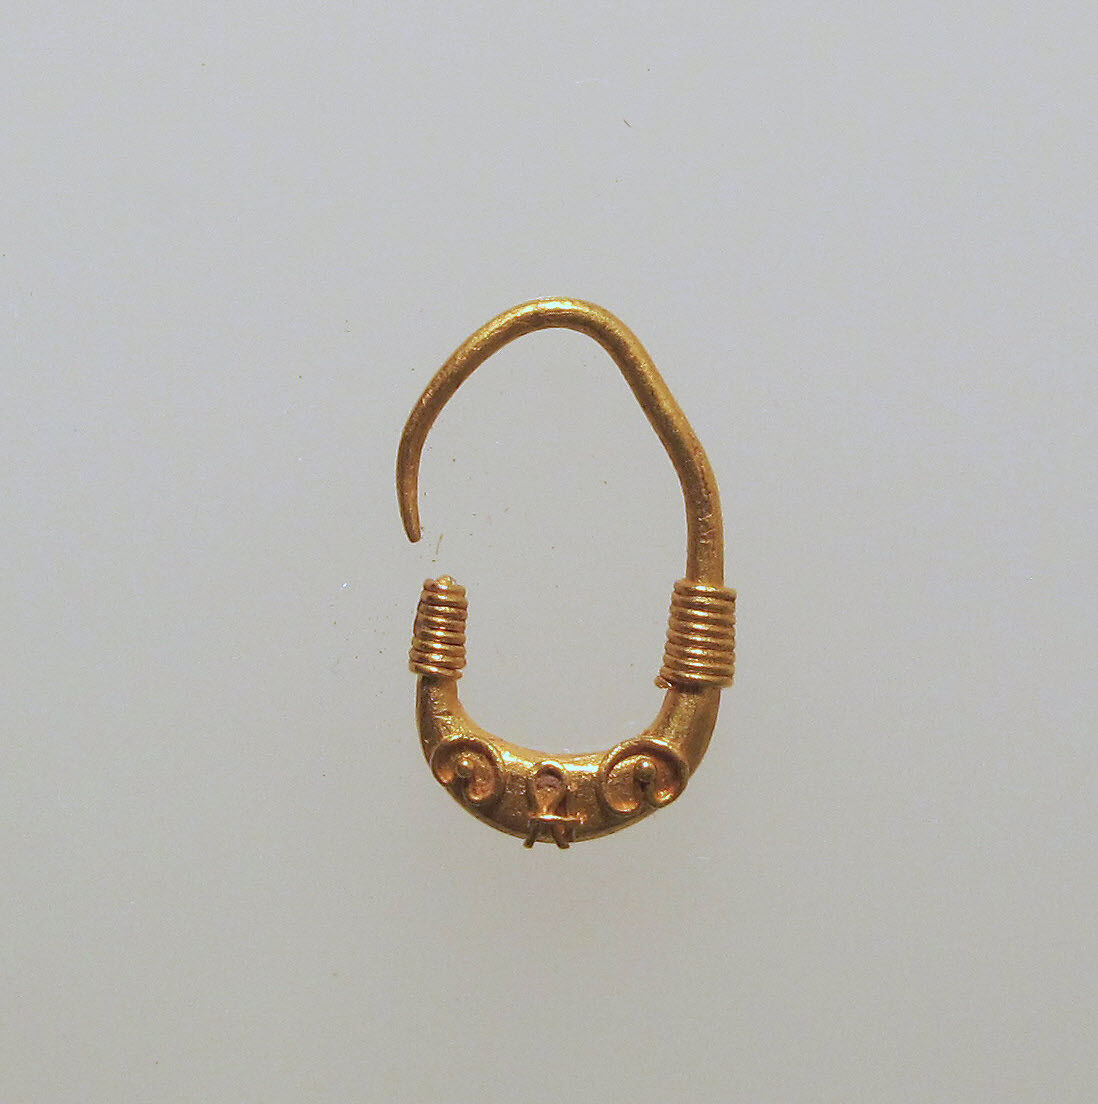 Earring with filigree, Gold, Cypriot 